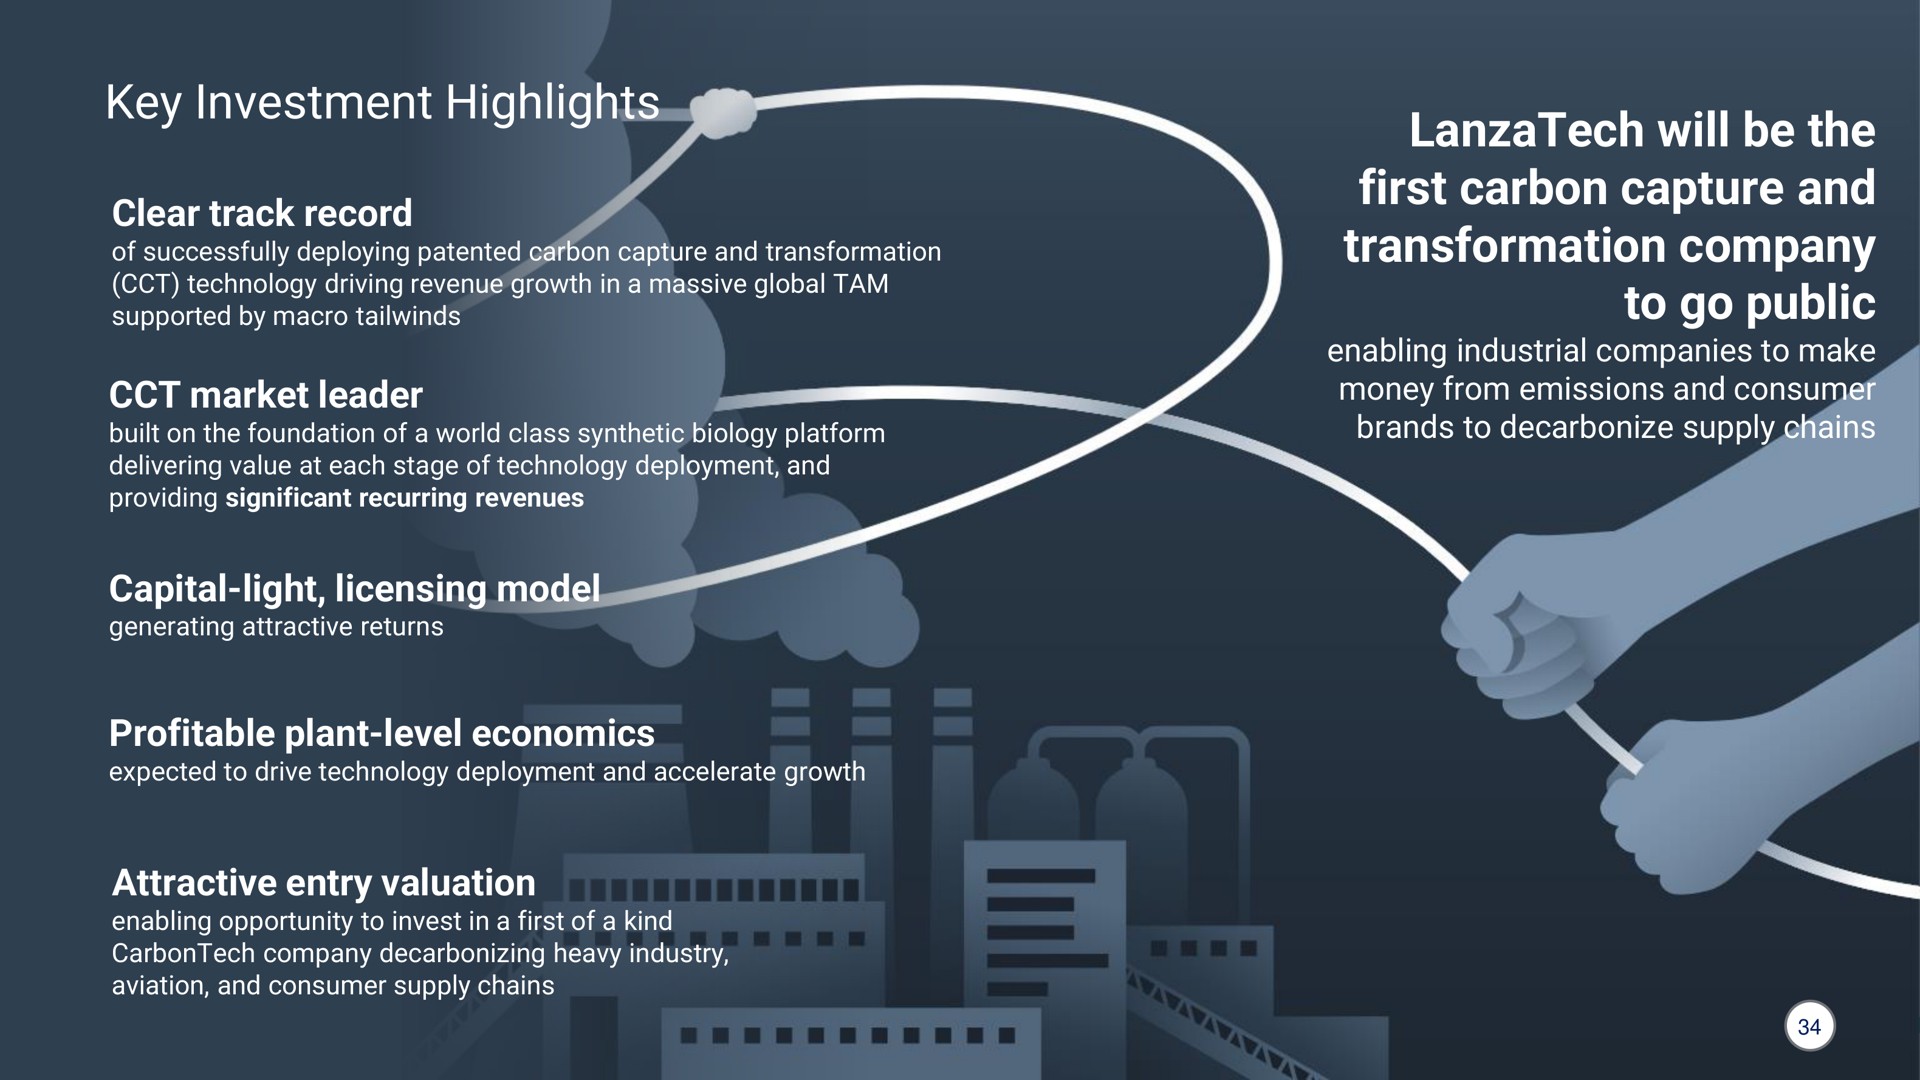 key investment highlights will be the first carbon capture and transformation company to go public highlight | LanzaTech